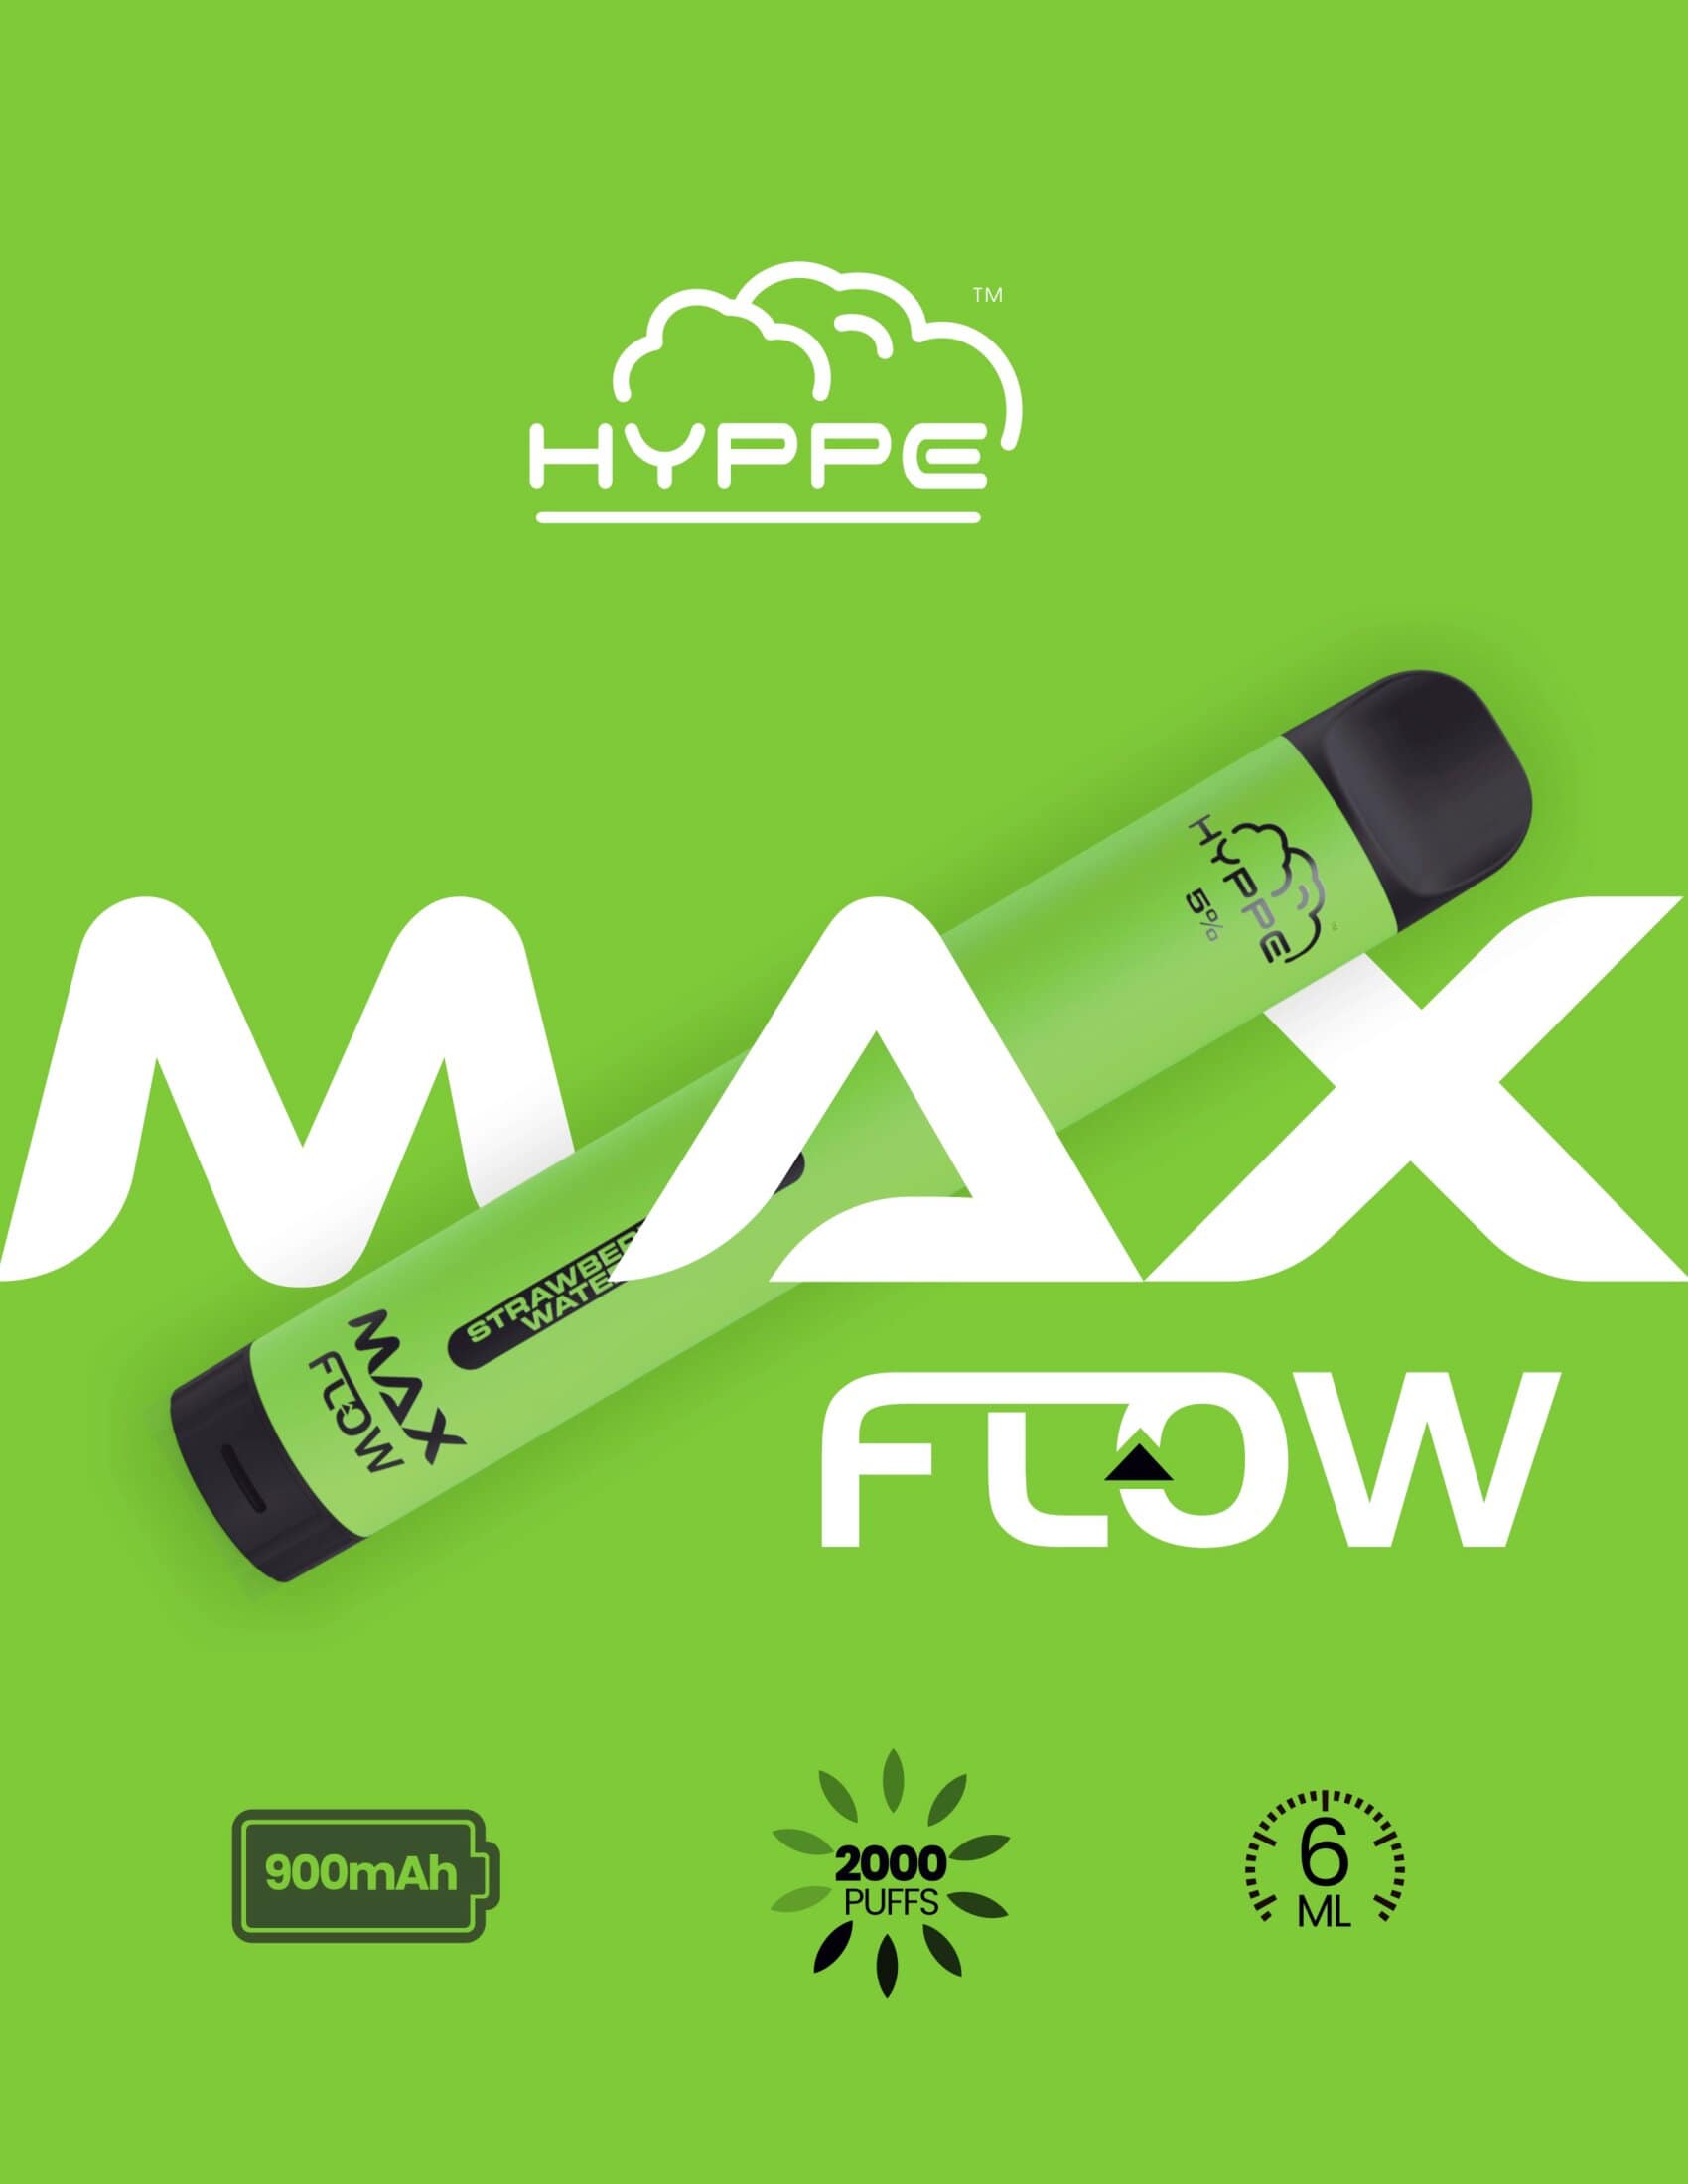 hyppe max flow stopped working